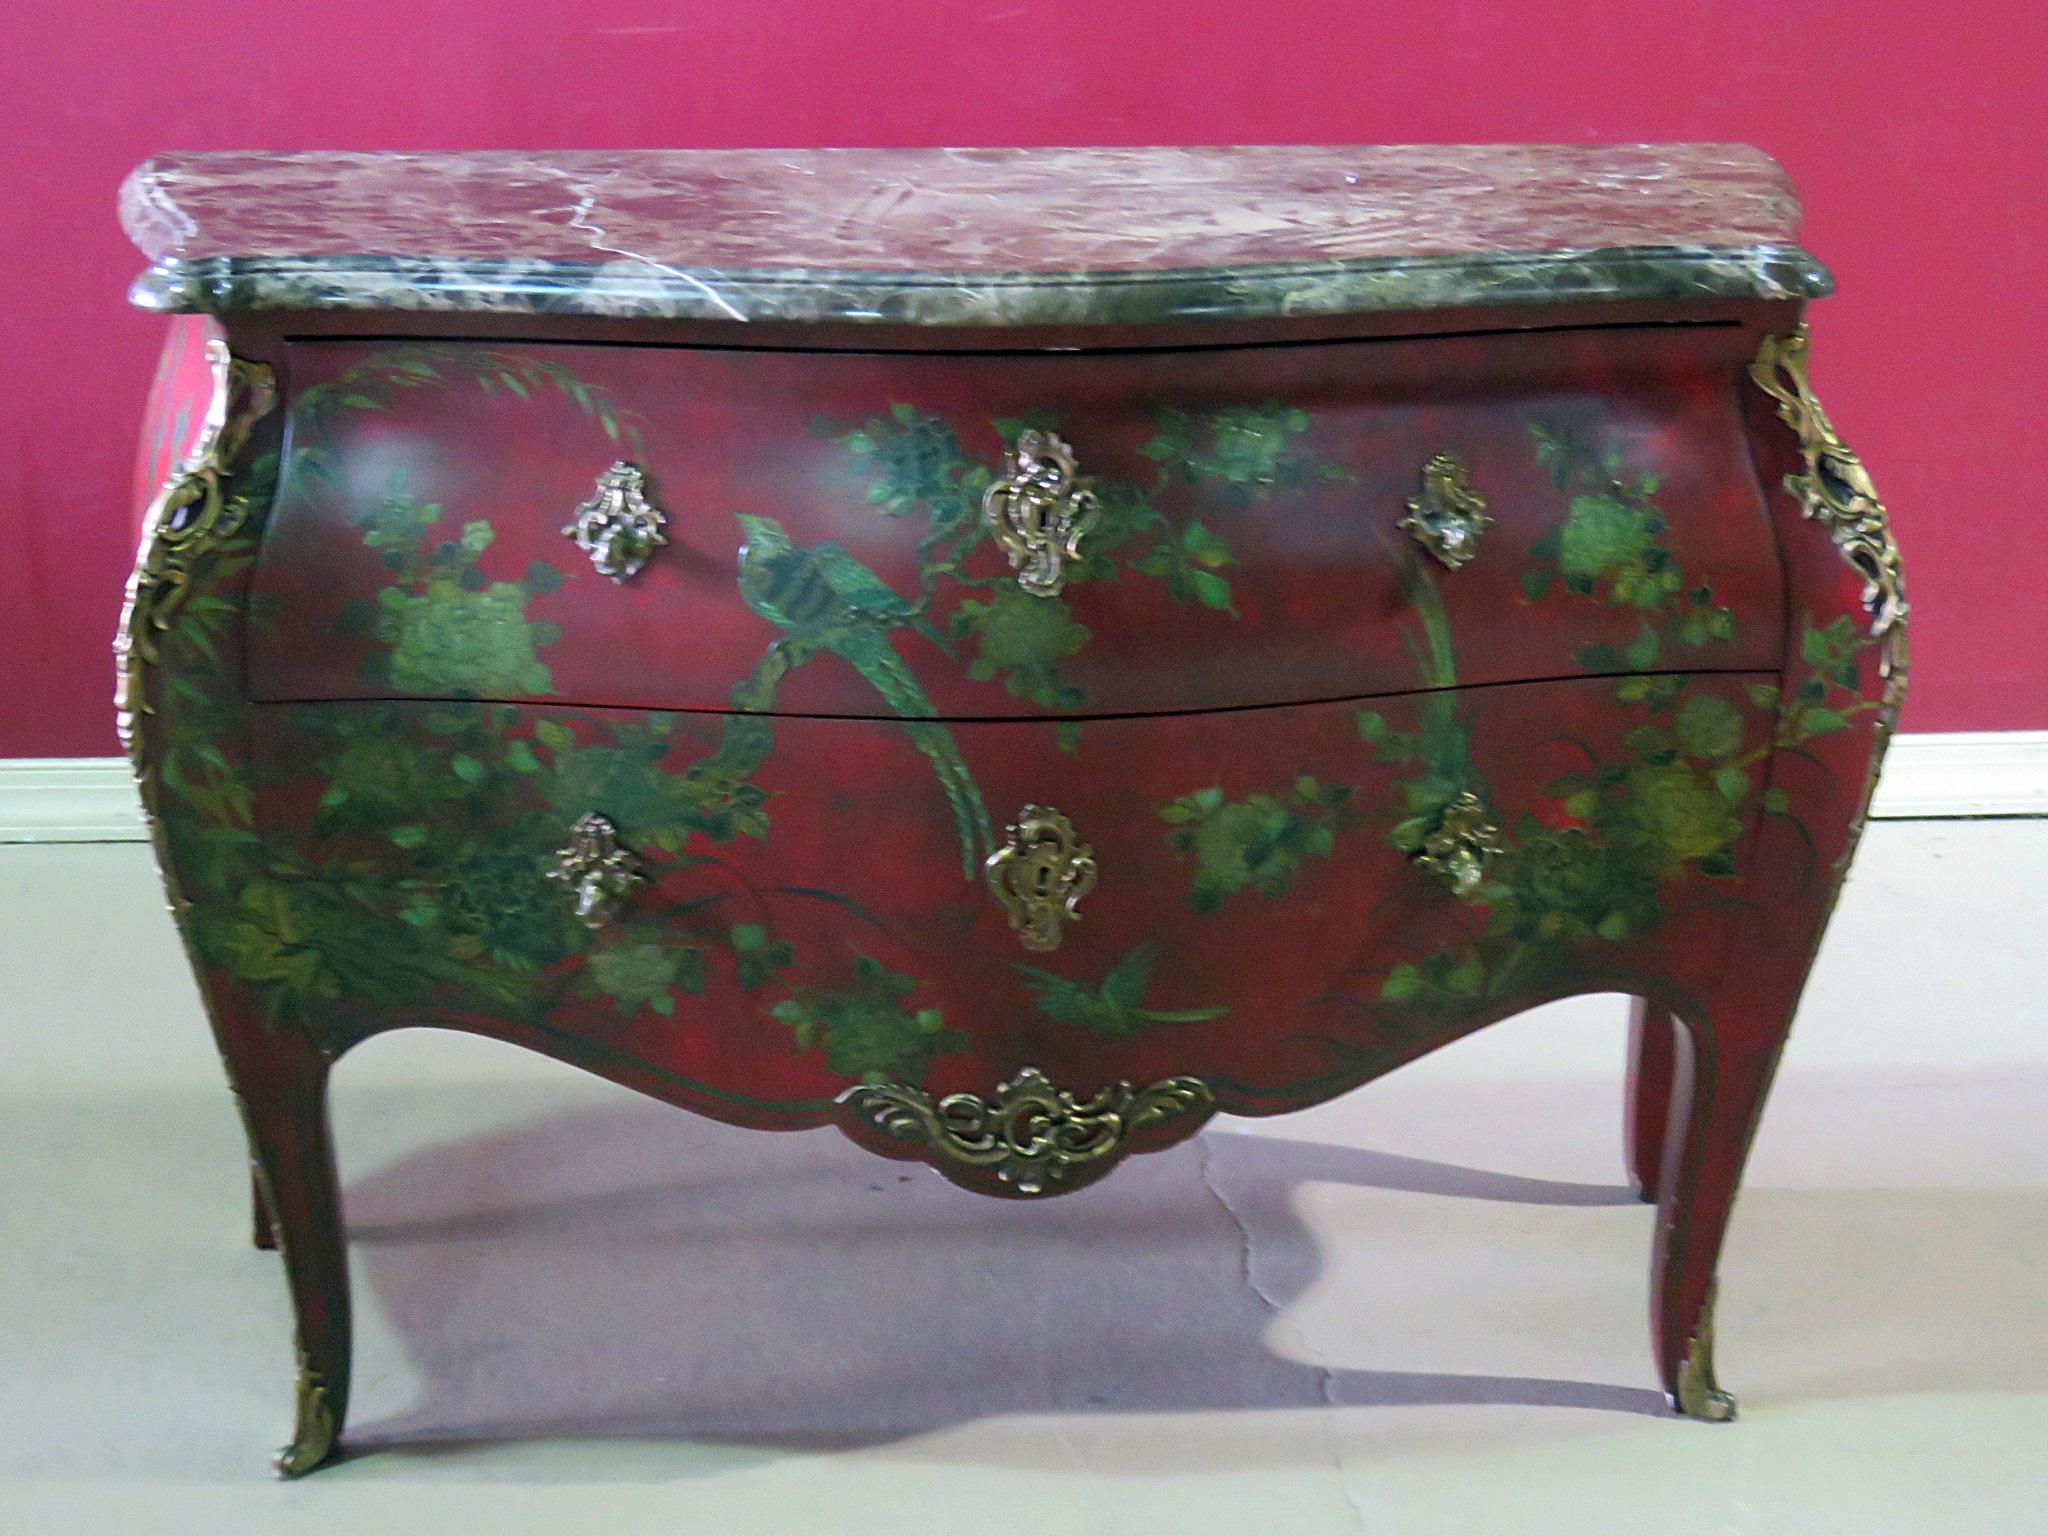 This is a fantastic red and green chinoiserie painted commode. The complimentary colors add a bright and lively look that is rather unique for commodes of this form. The piece features mythical birds and lush foliage. The painting is raised